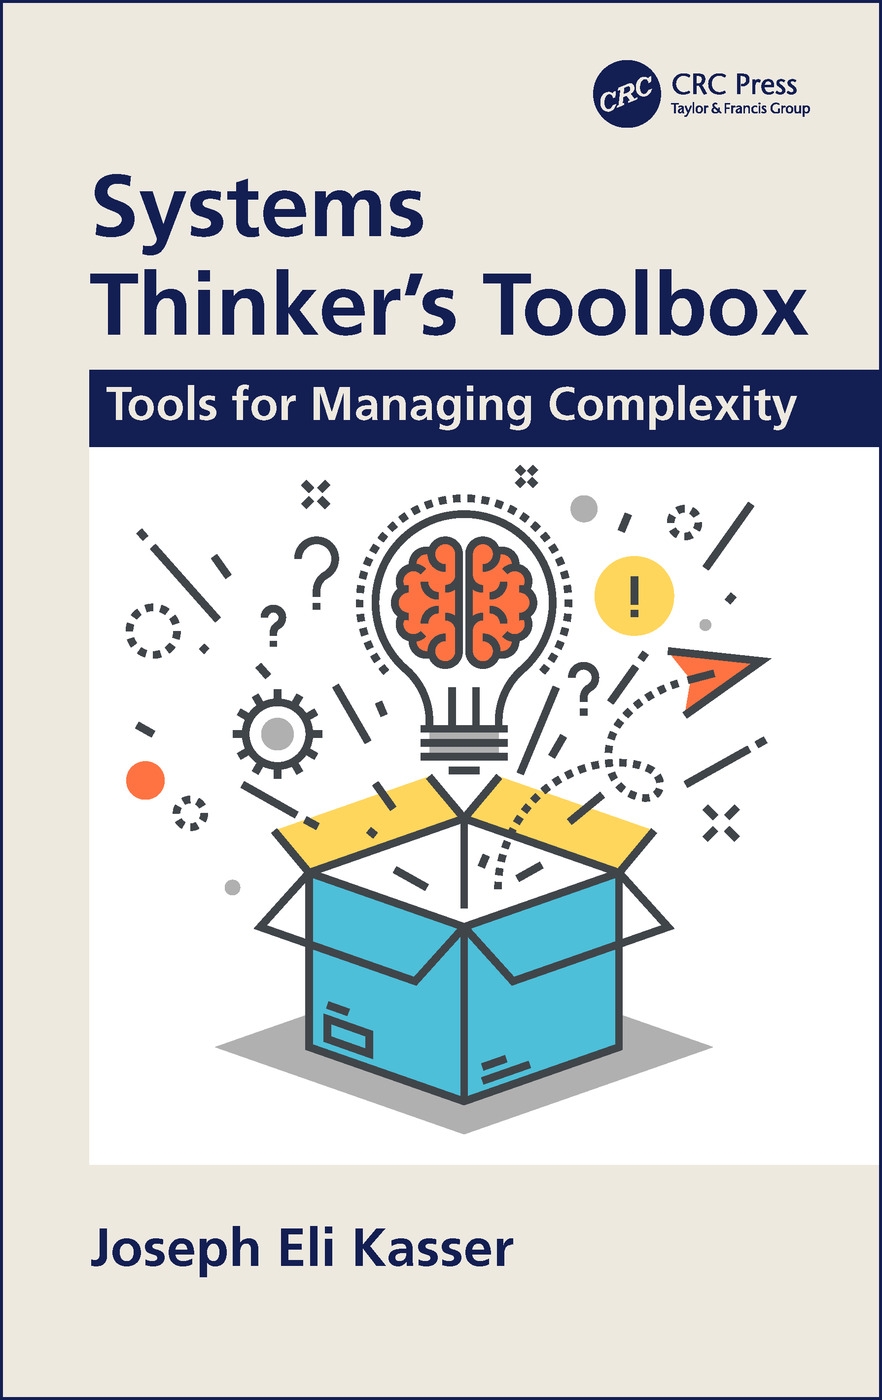 Systems Thinker’s Toolbox: Tools for Managing Complexity